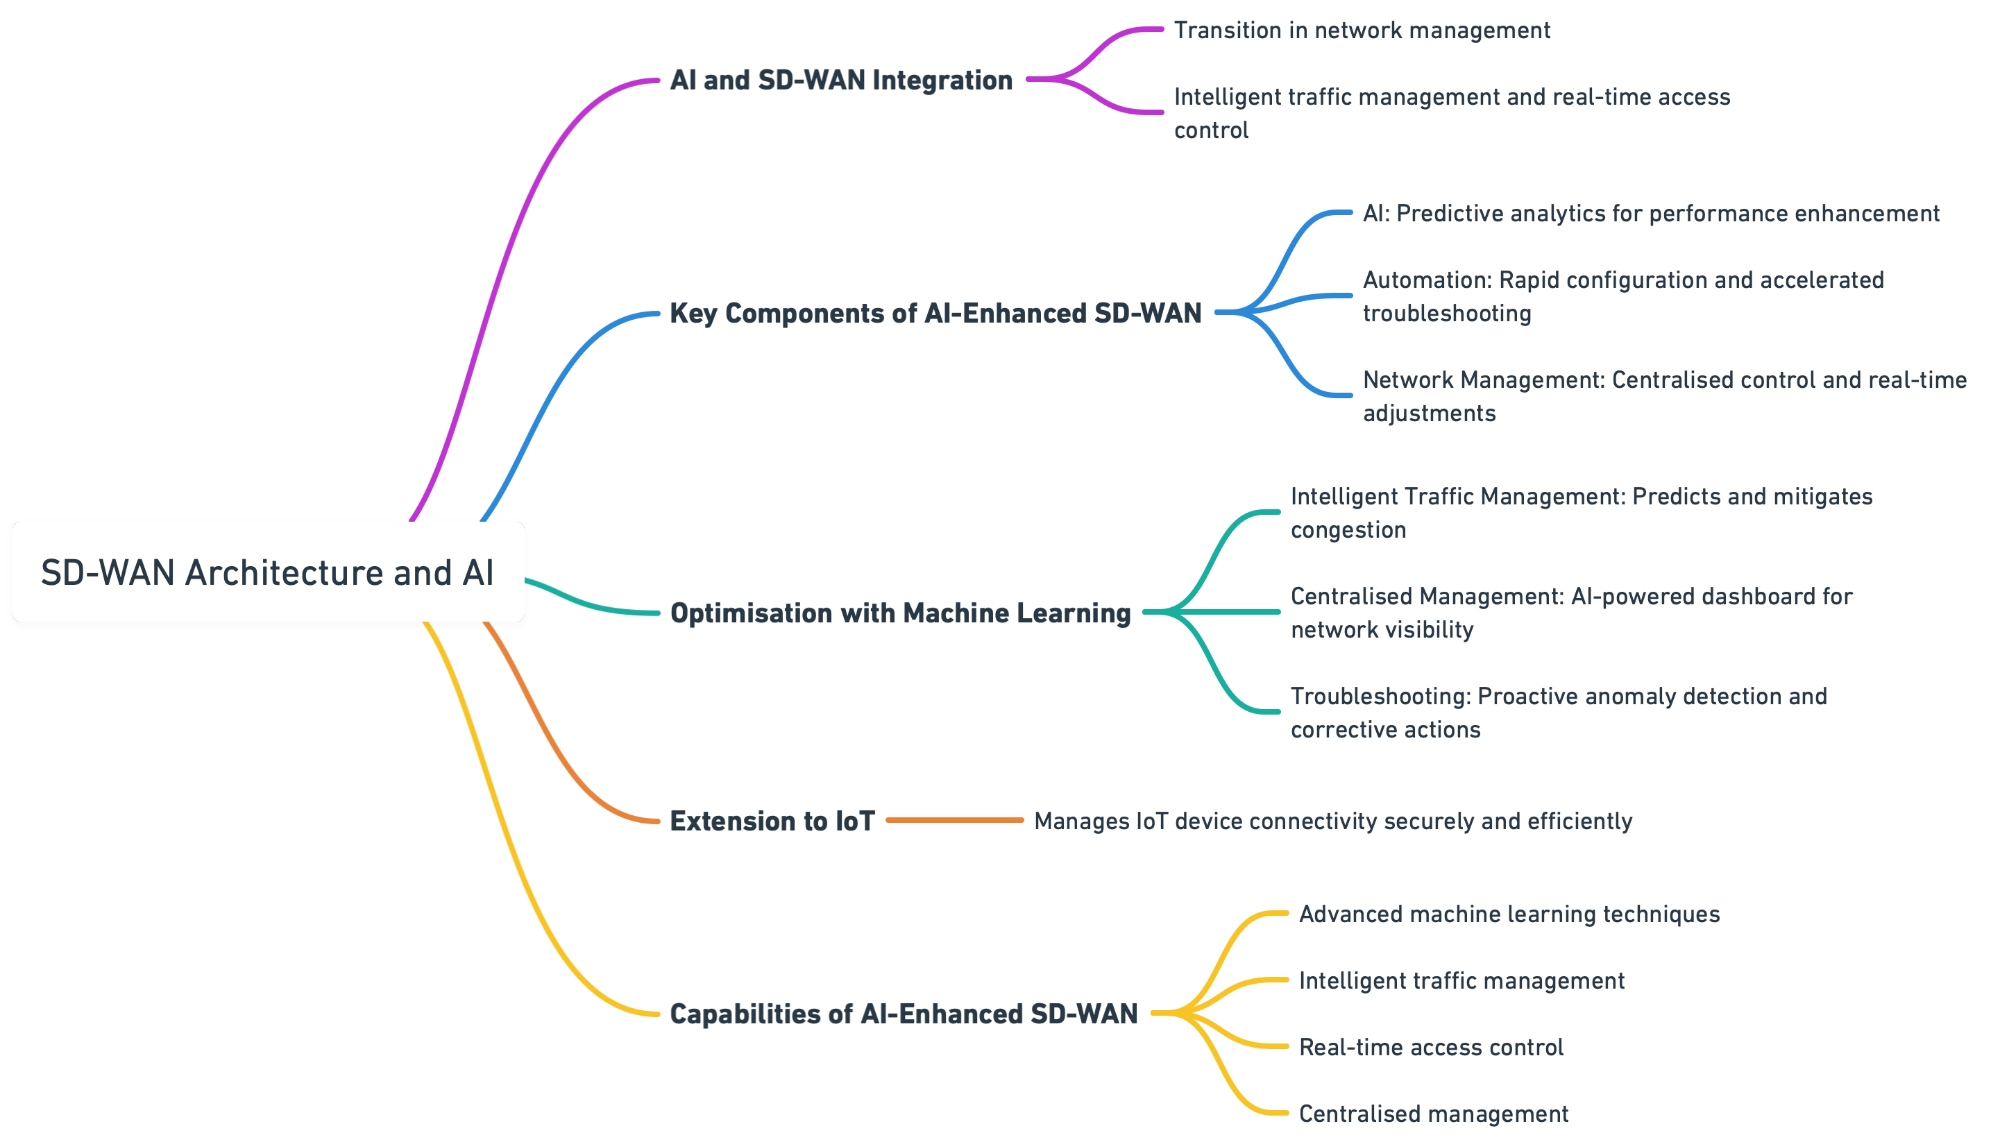 SD-WAN Architecture and AI Mind Map